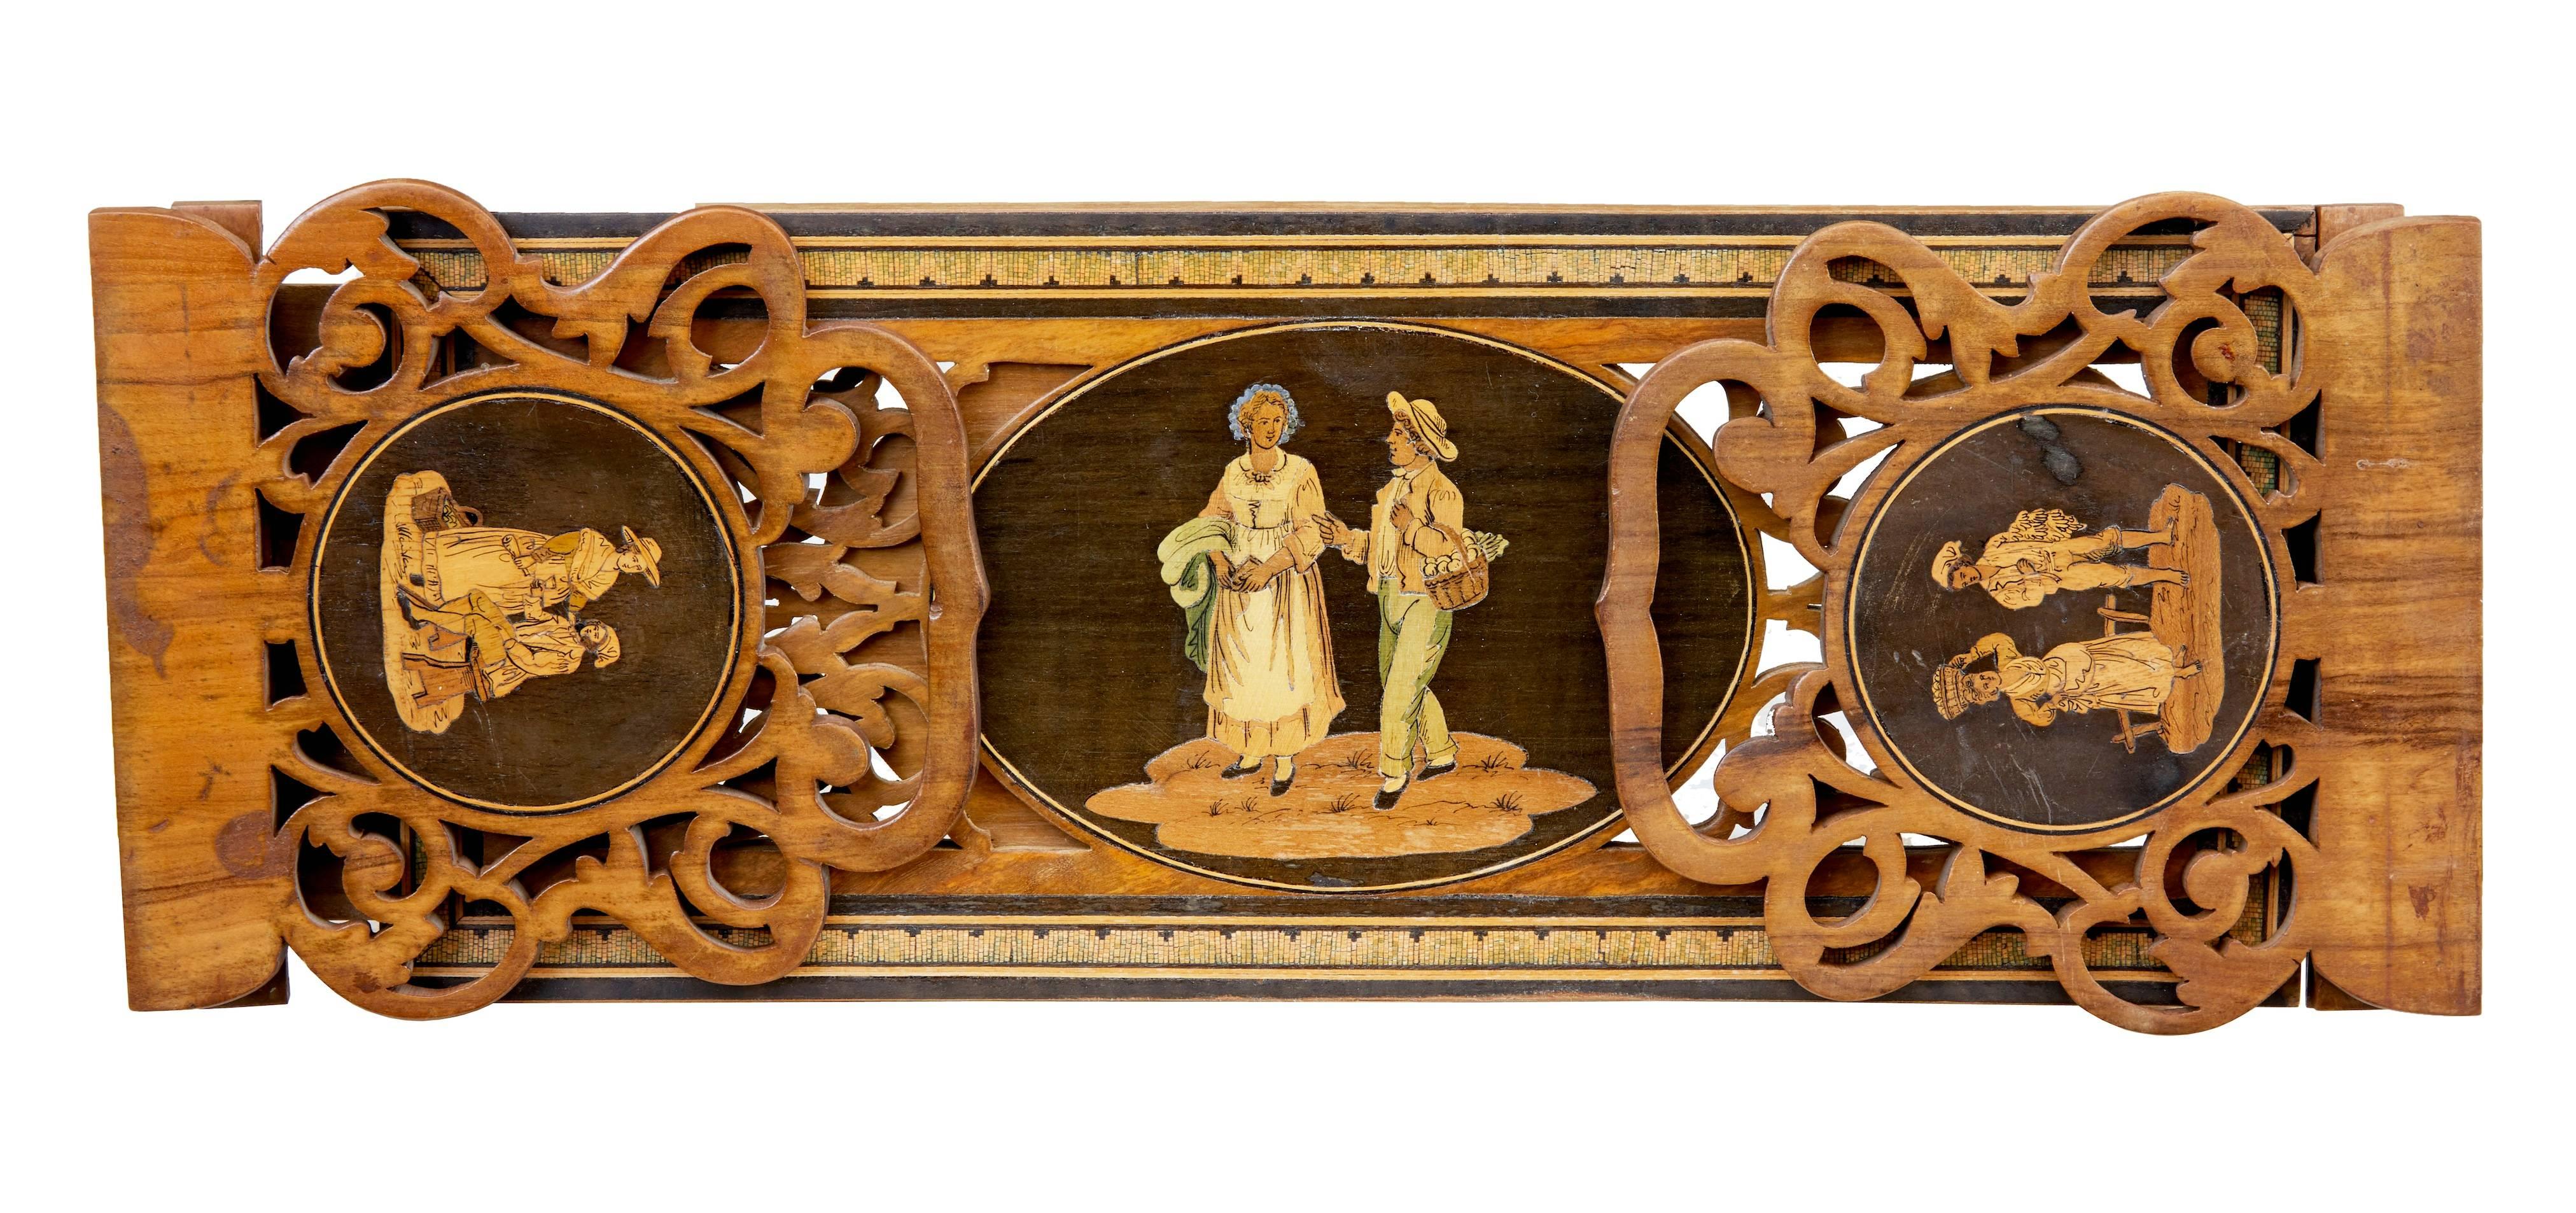 Good quality piece of Sorrento ware.
Pierced fretwork book ends. Three inlaid panels of a rural subject.
Extends an extra 10 inches.
Minor veneer restorations and repairs to underneath.

Height: 6